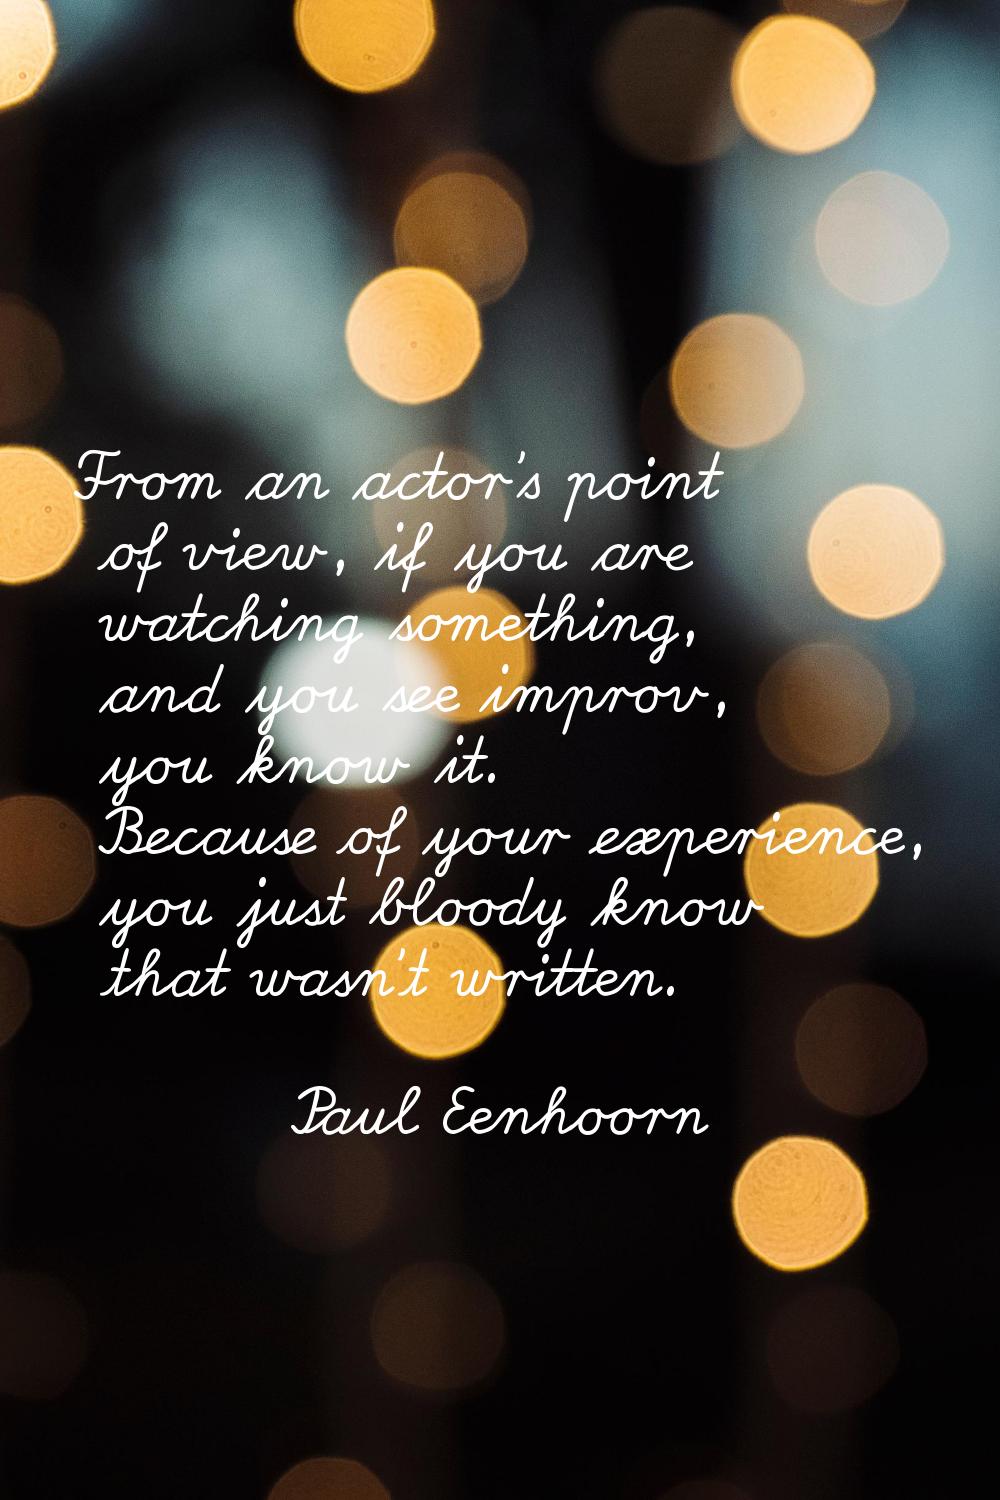 From an actor's point of view, if you are watching something, and you see improv, you know it. Beca